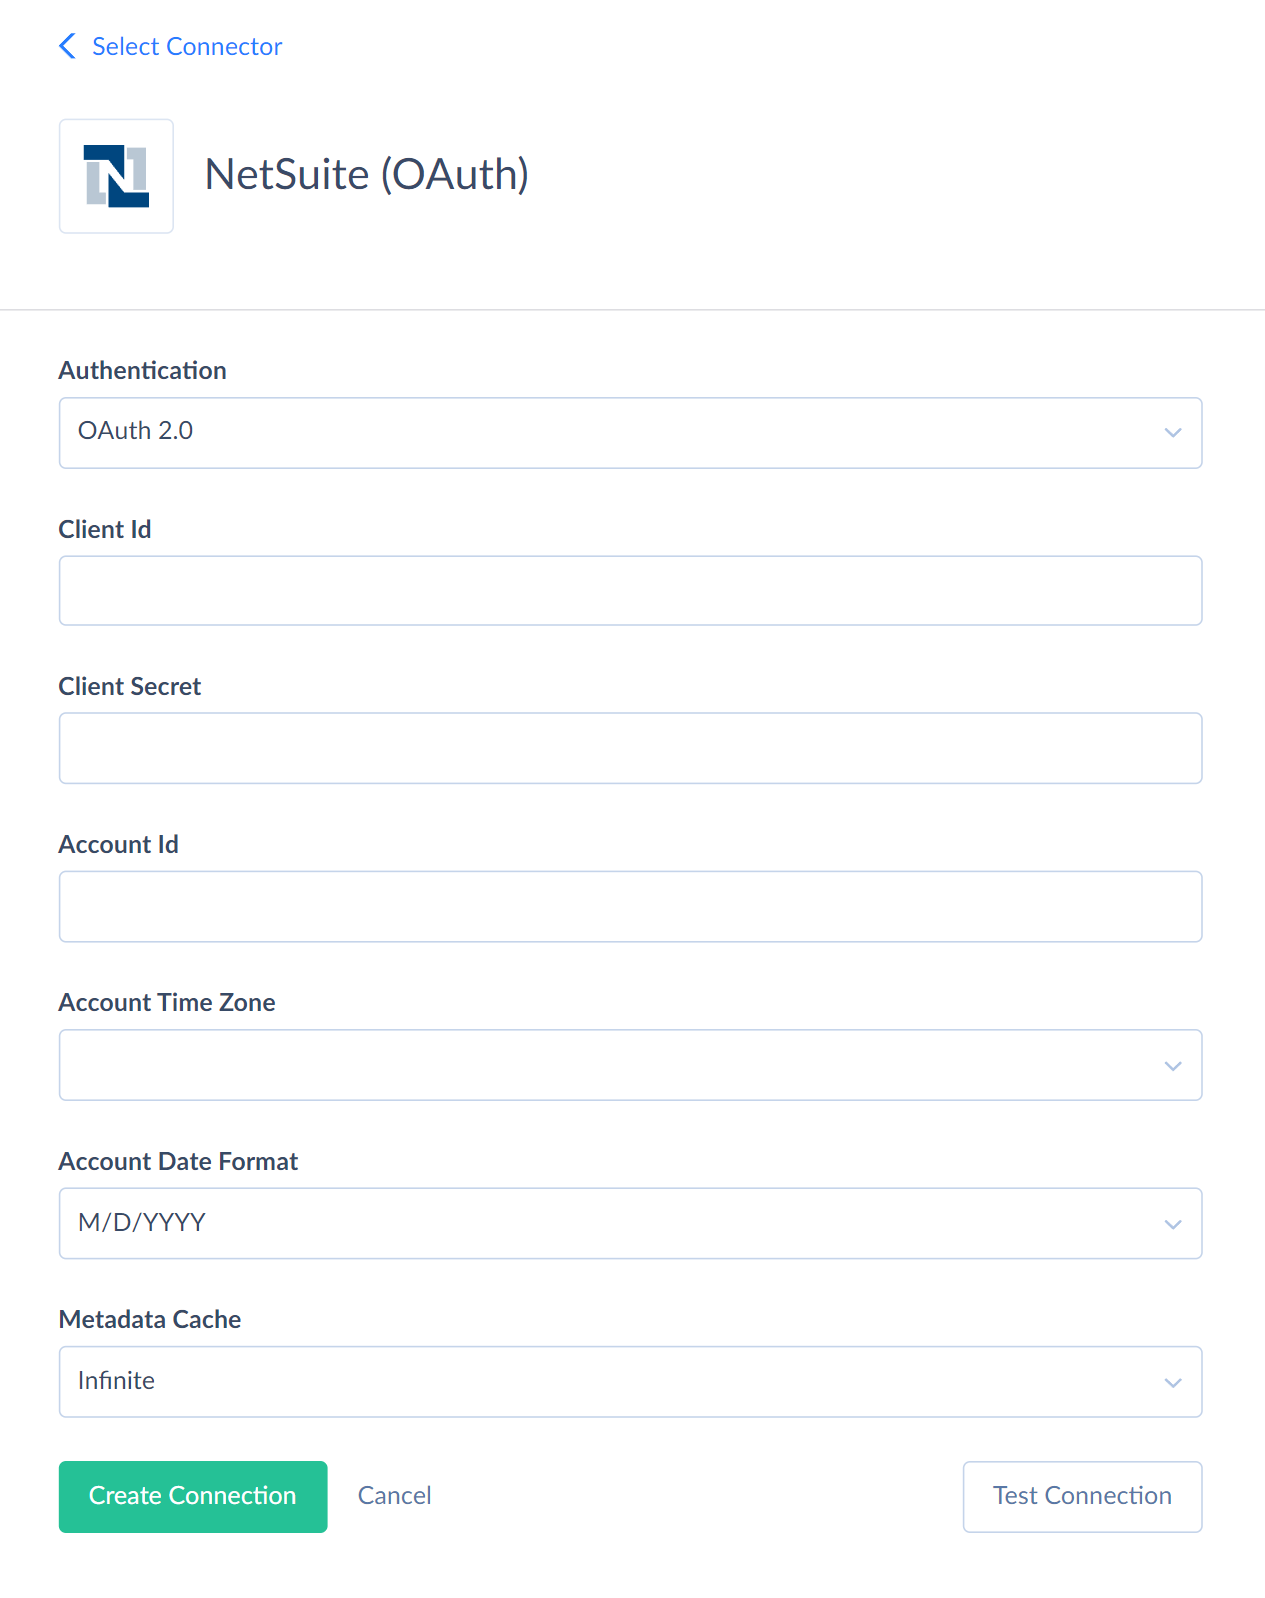 NetSuite connection editor - OAuth 2.0 authentication